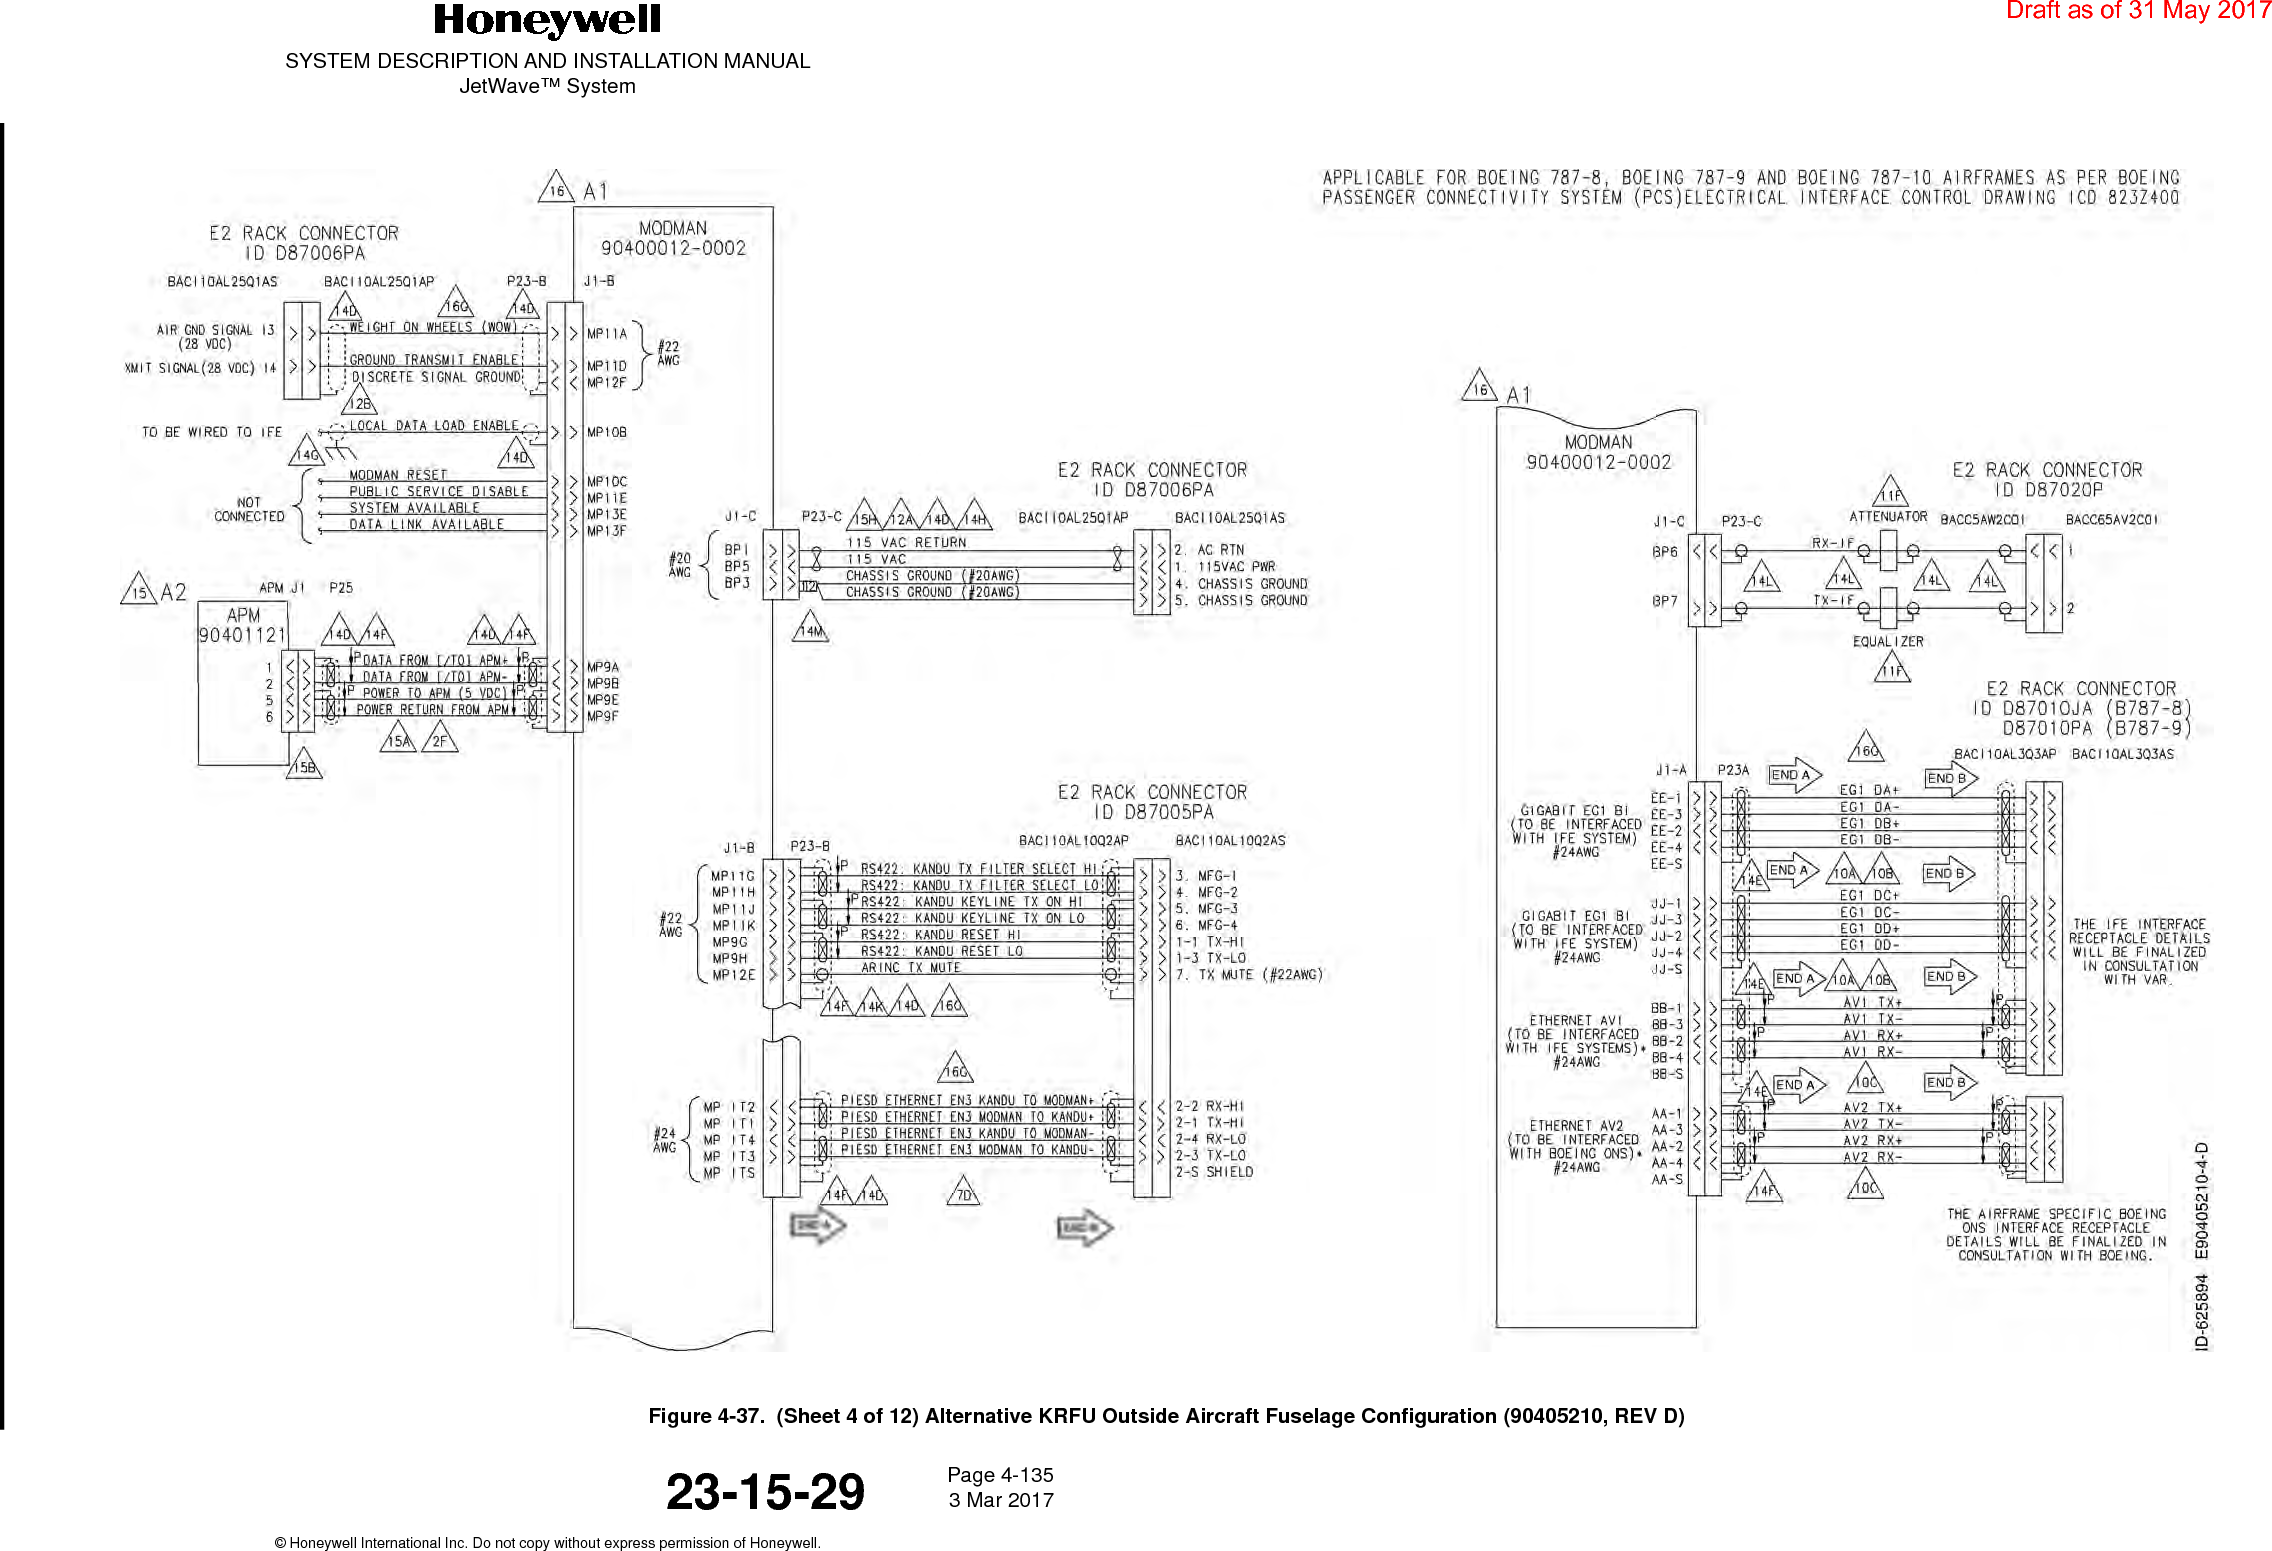 SYSTEM DESCRIPTION AND INSTALLATION MANUALJetWave™ SystemPage 4-135 3 Mar 2017© Honeywell International Inc. Do not copy without express permission of Honeywell.23-15-29Figure 4-37.  (Sheet 4 of 12) Alternative KRFU Outside Aircraft Fuselage Configuration (90405210, REV D)Draft as of 31 May 2017